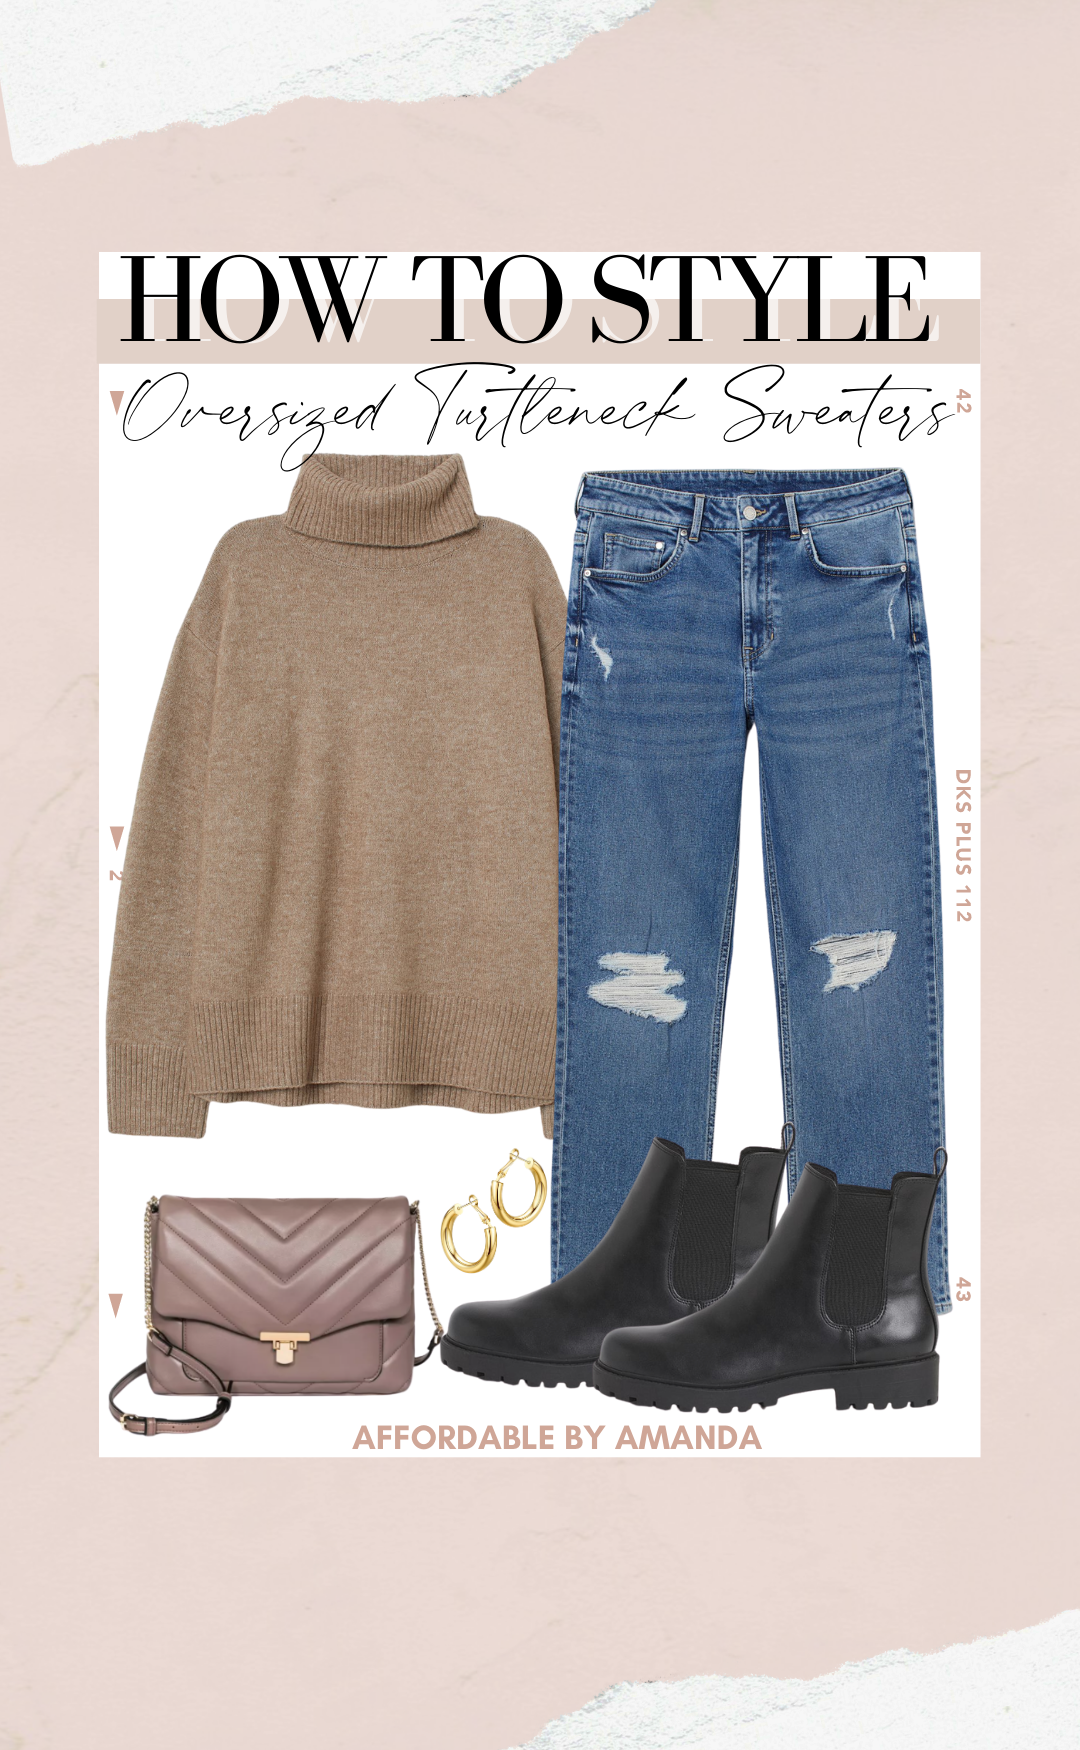 How to Wear an Oversized Turtleneck Sweater - Affordable by Amanda